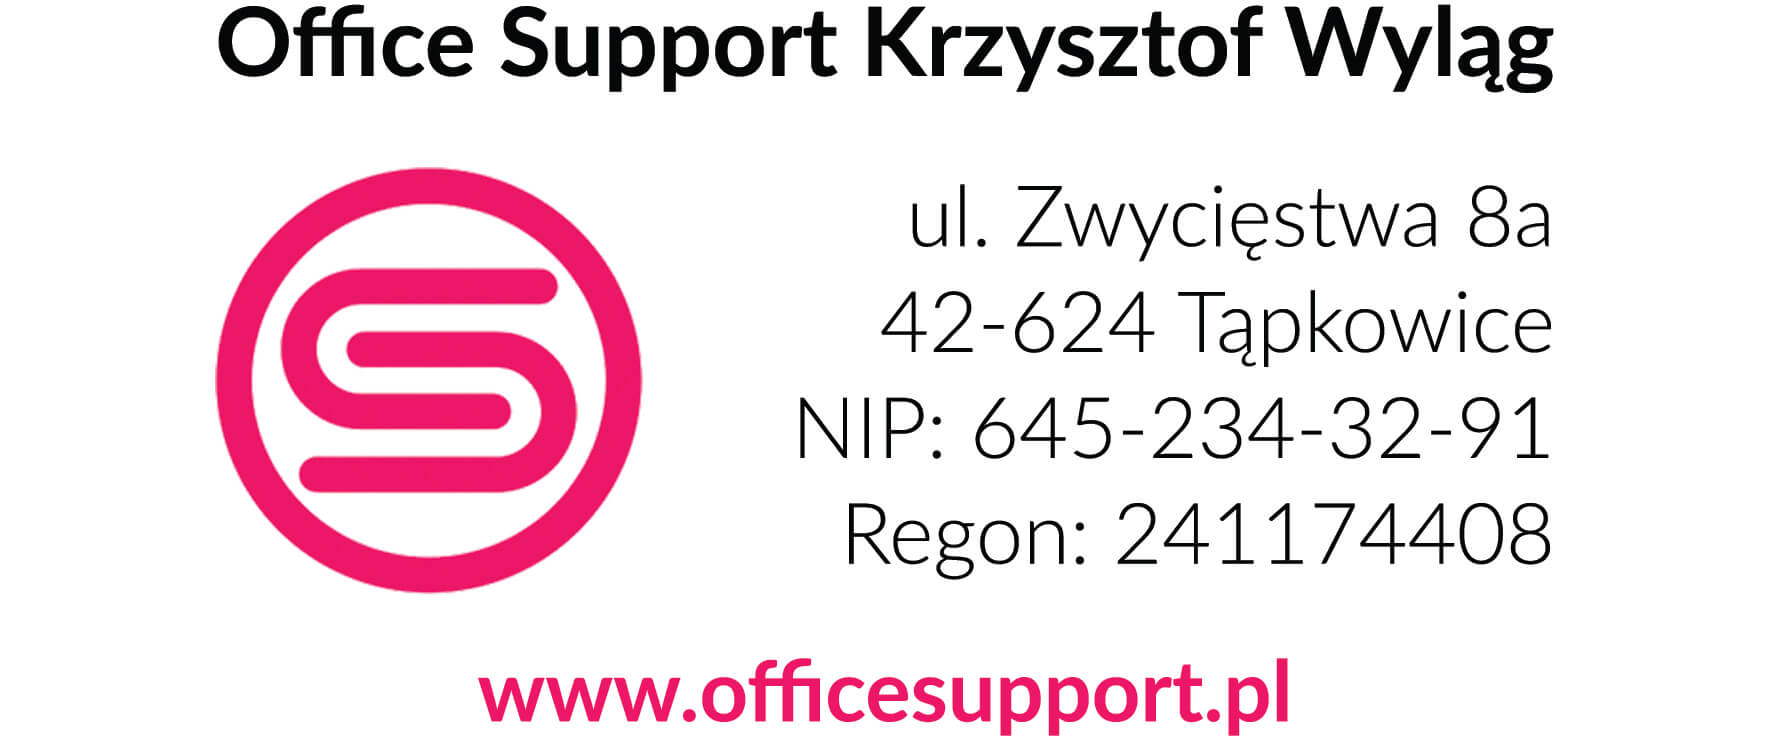 Office Support address